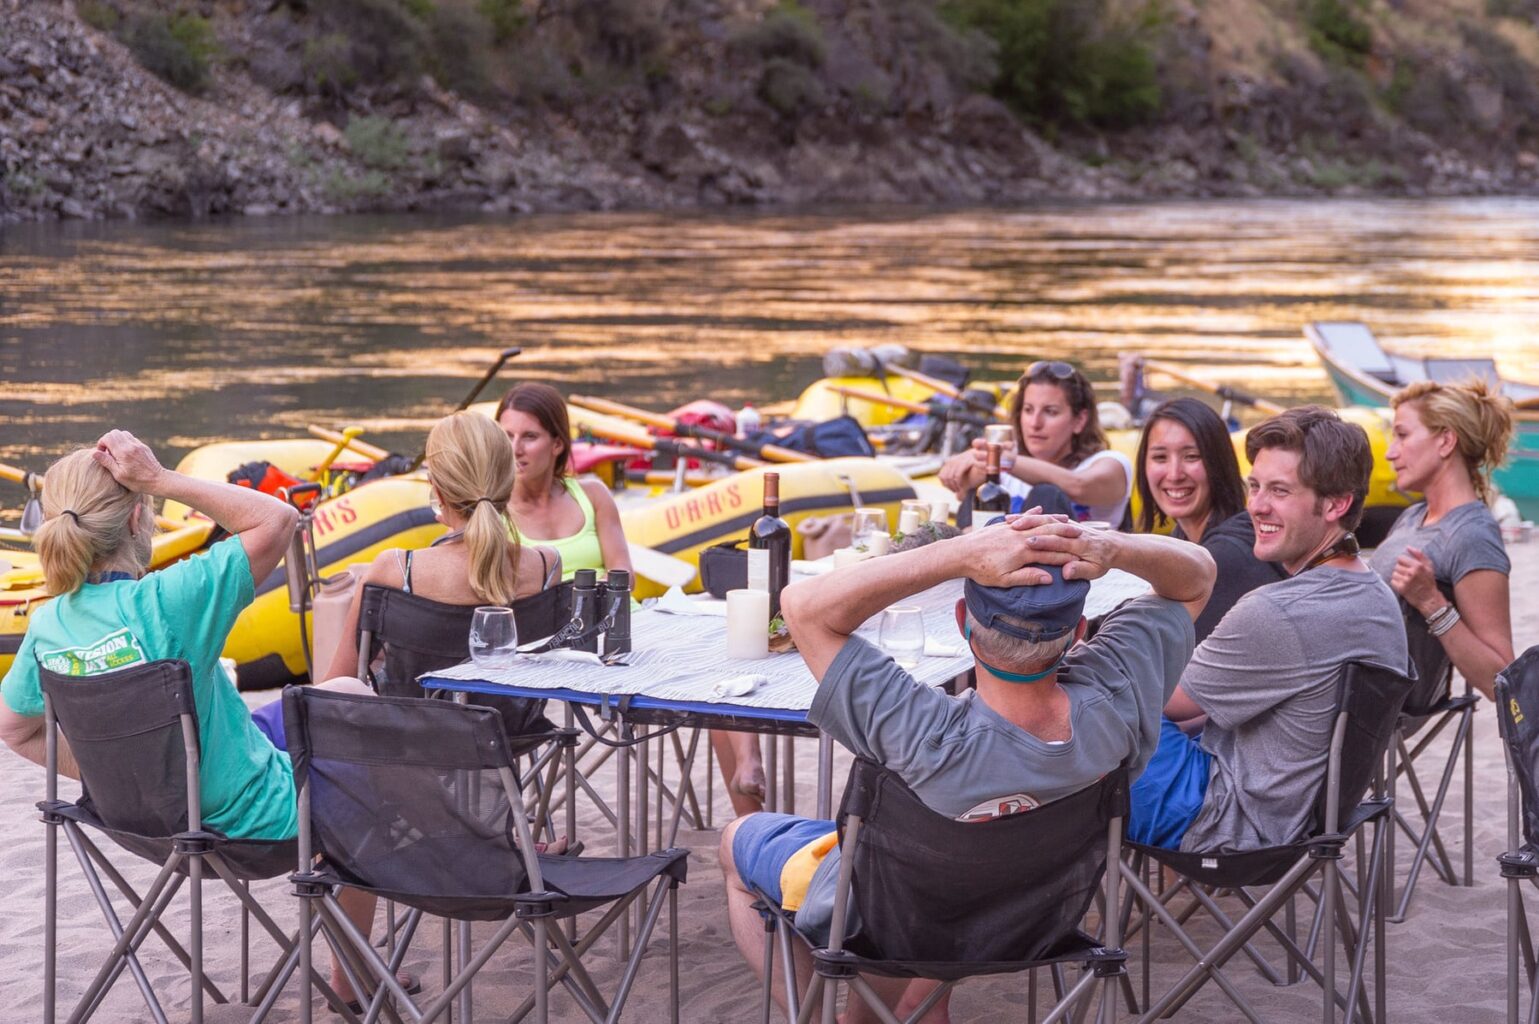 A group of adults sit around a linen draped table on a sandy beach drinking wine and socializing on an OARS Wine on the Salmon River trip.